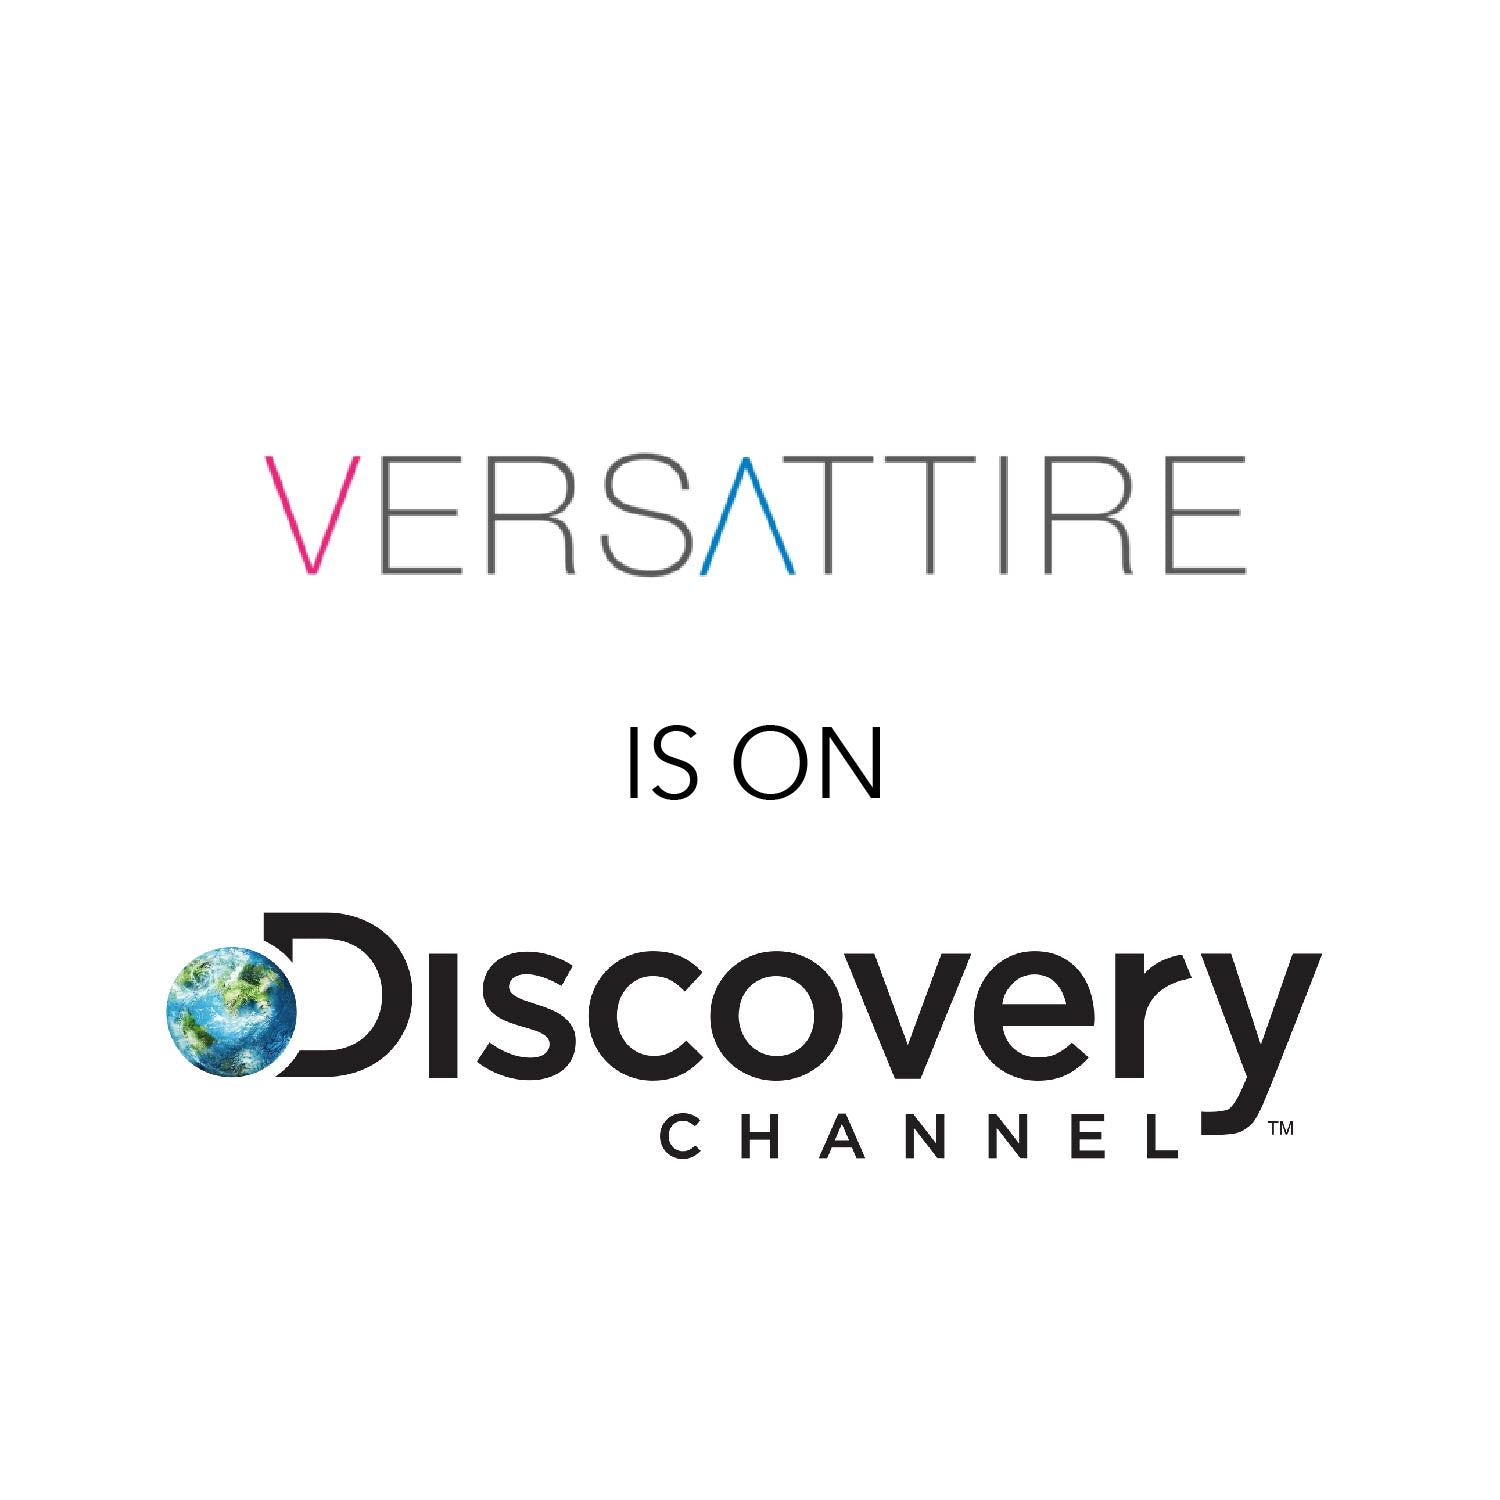 Versattire is on the Discovery Channel!